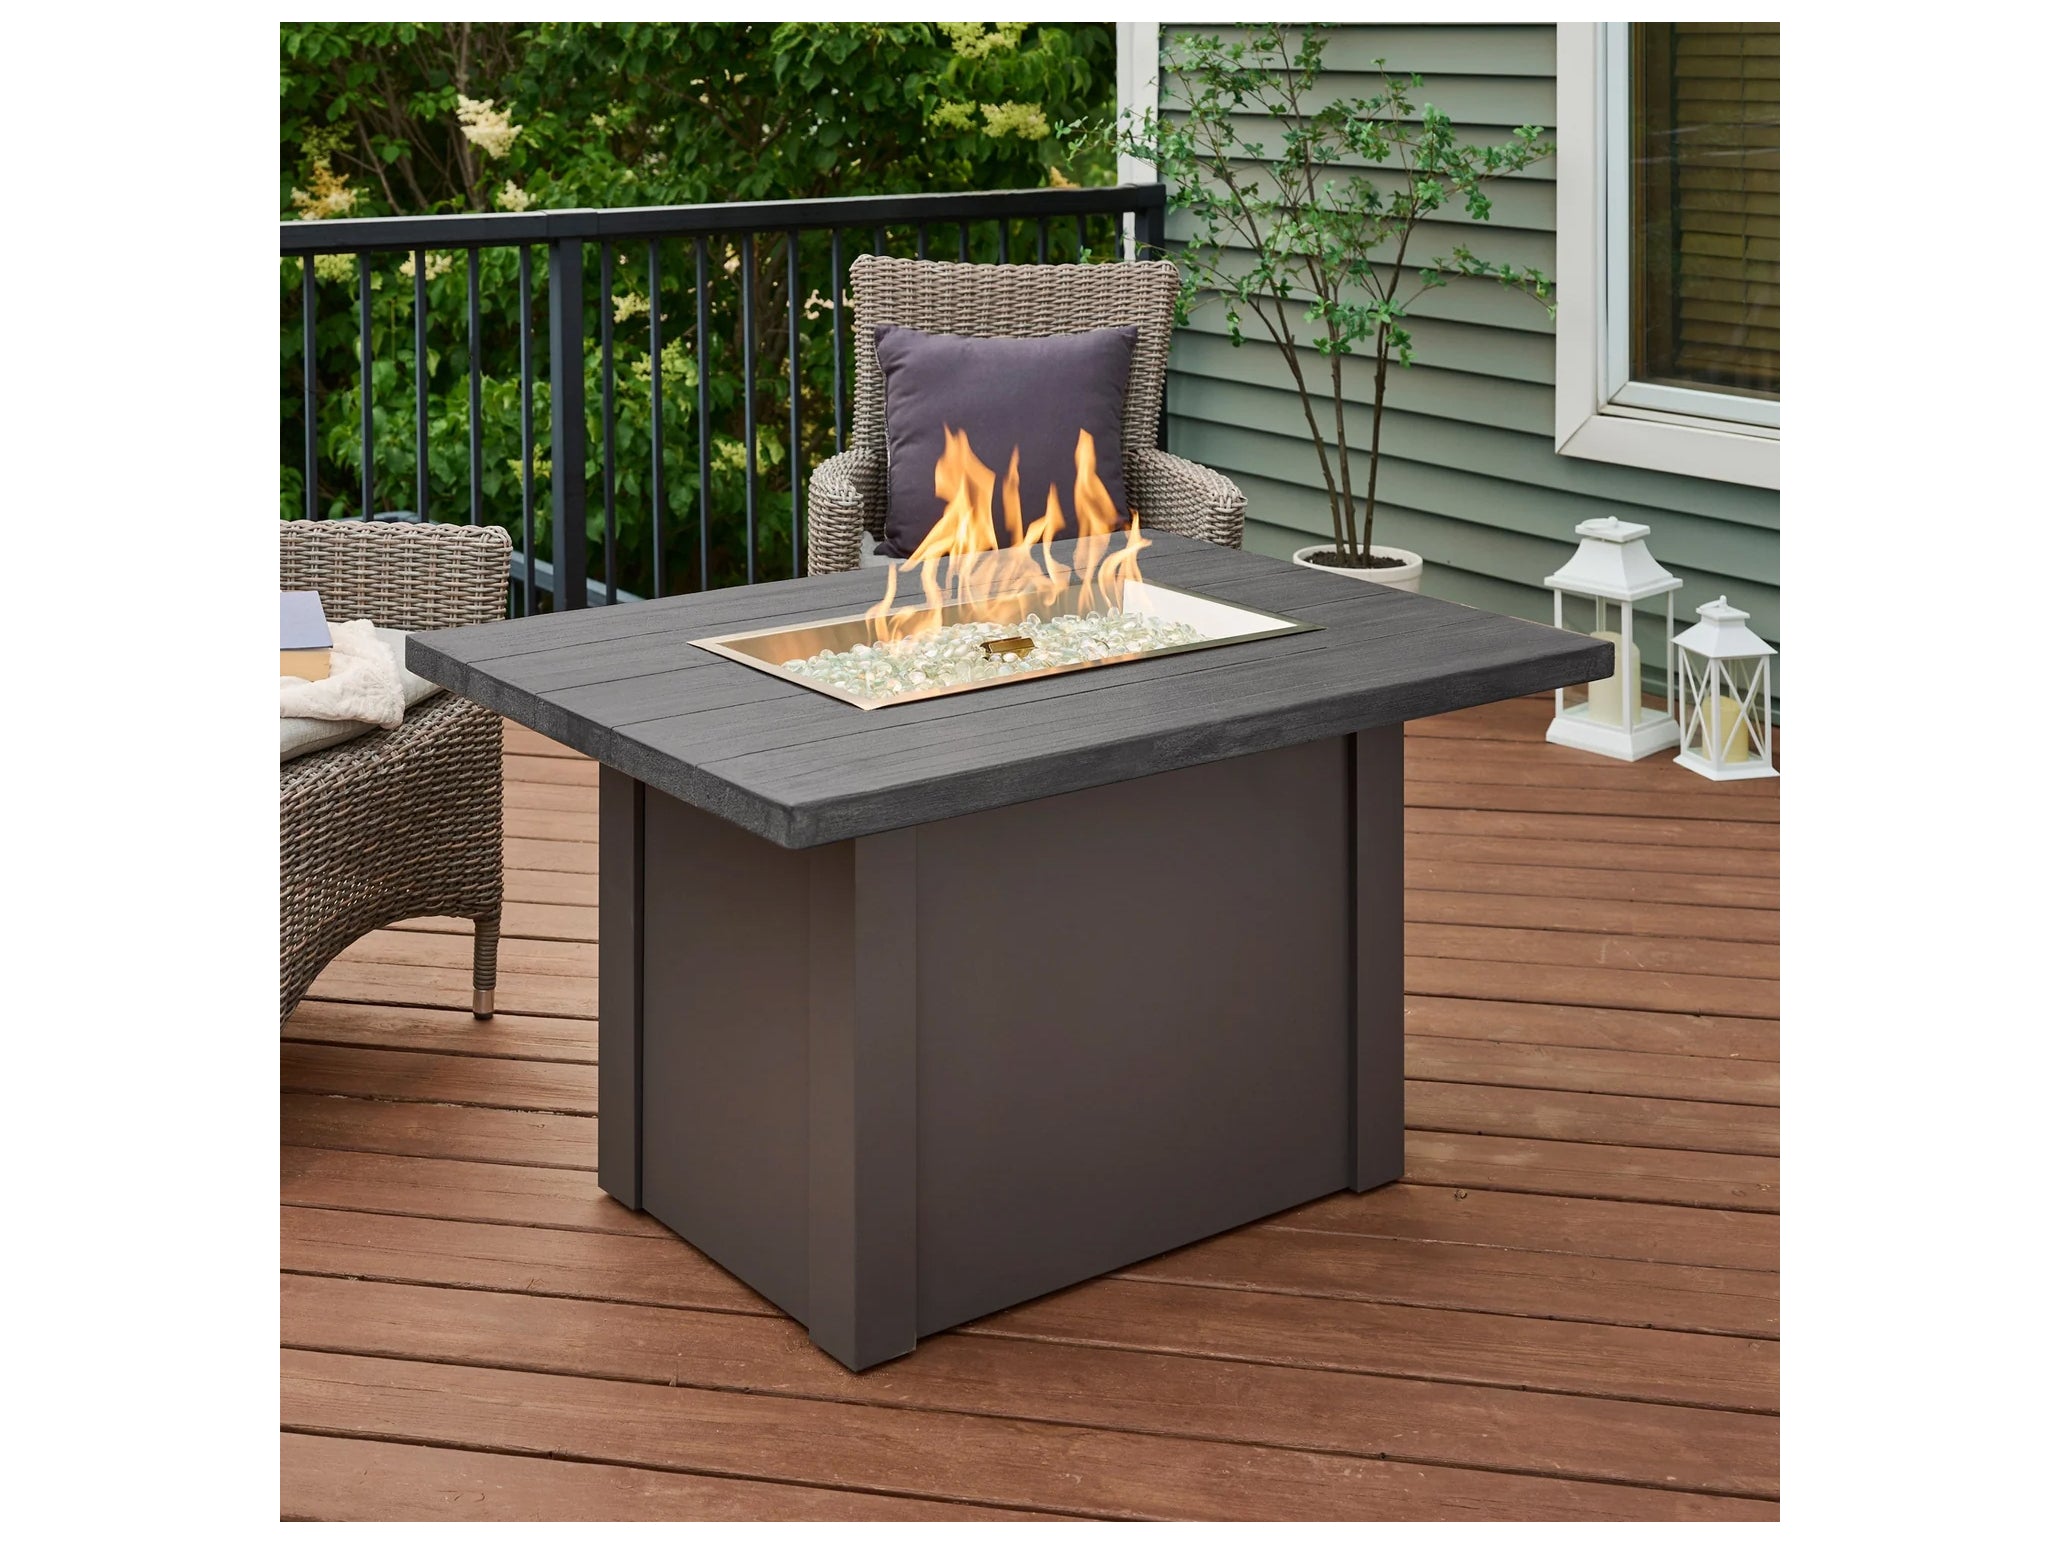 Outdoor Greatroom - 44’‘W x 30’'D - Havenwood Steel Graphite Grey Rectangular Carbon Grey Everblend Top Gas Fire Pit Table